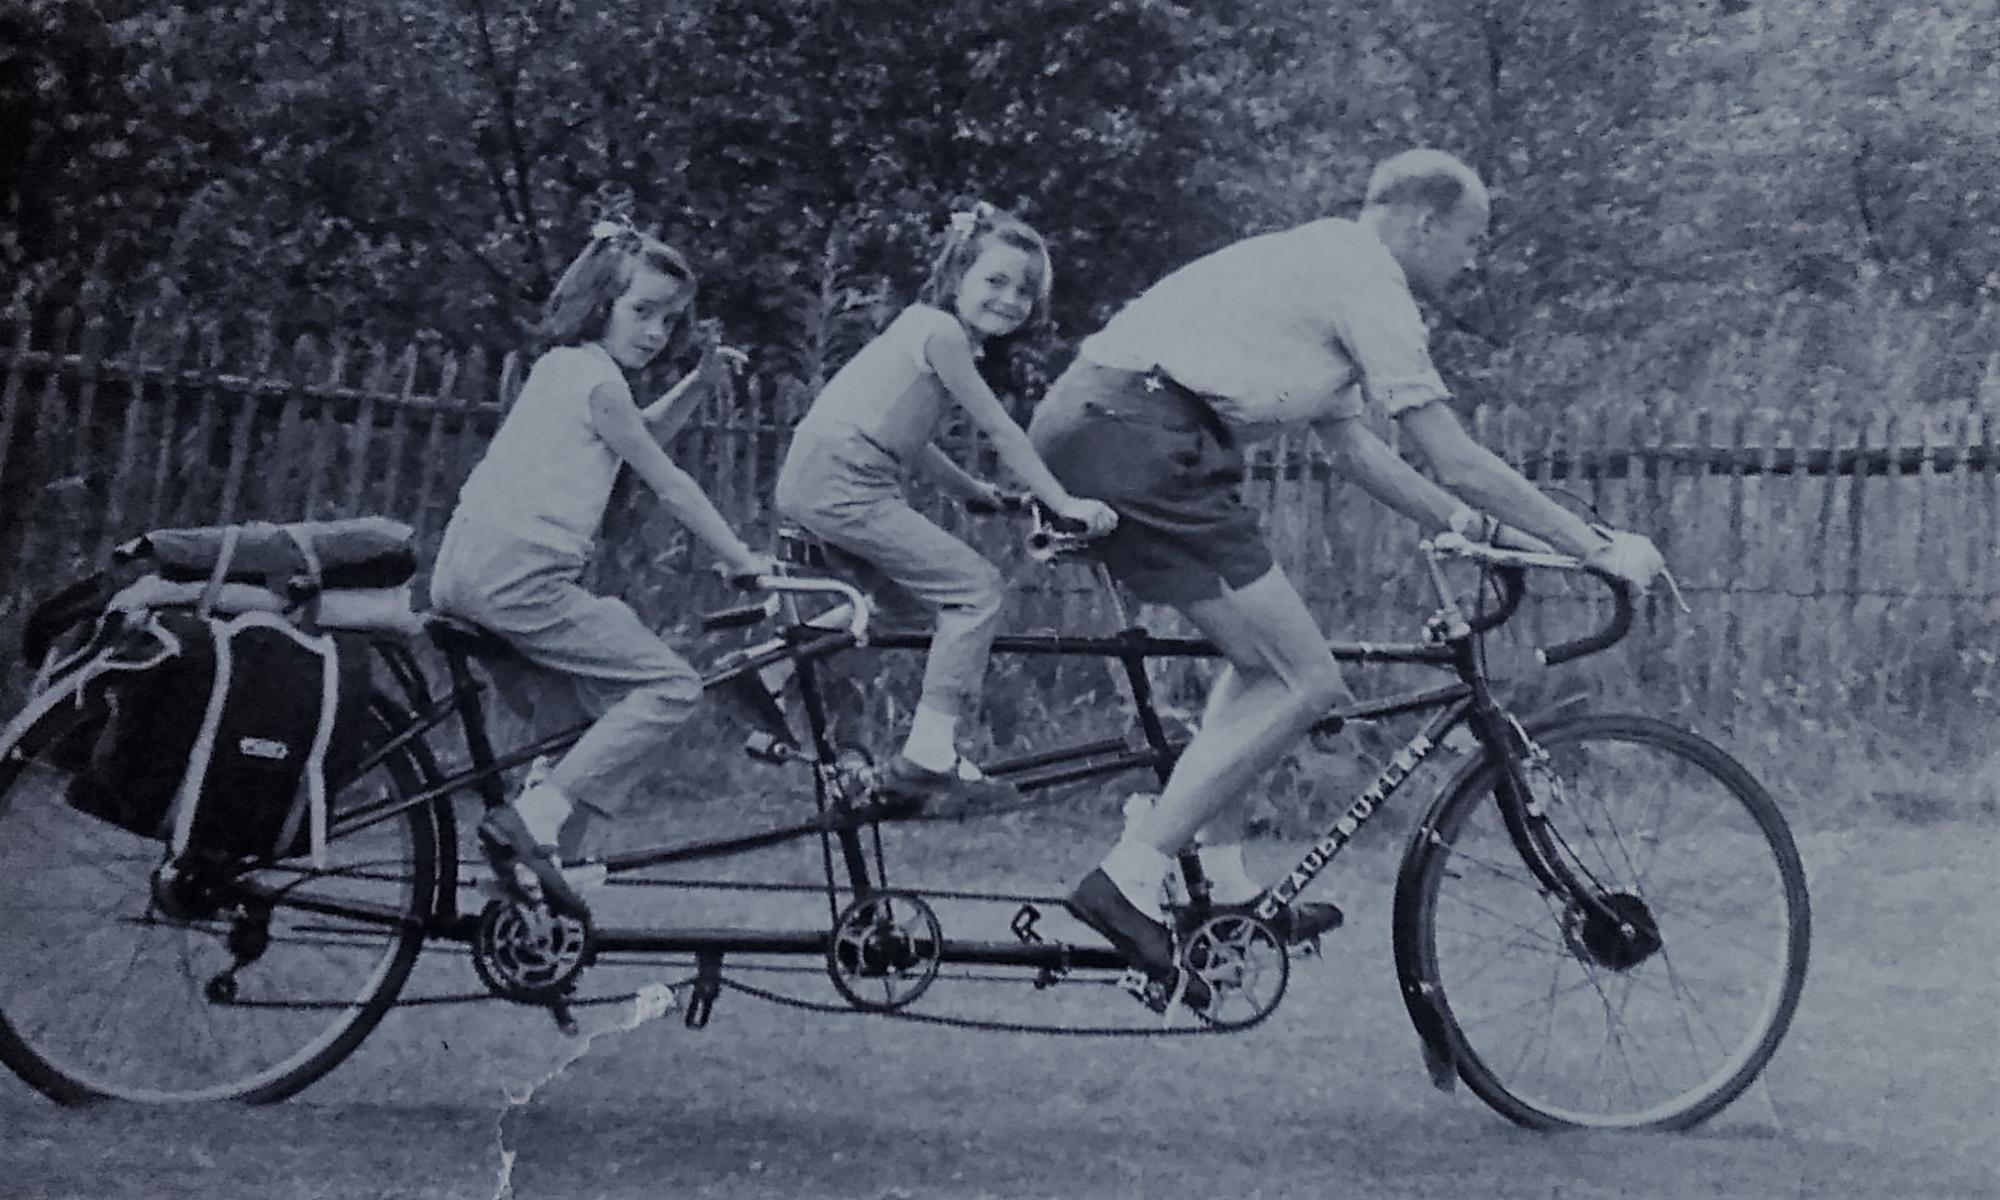 Jack with Susan and Carolyn on their tandem, 1961